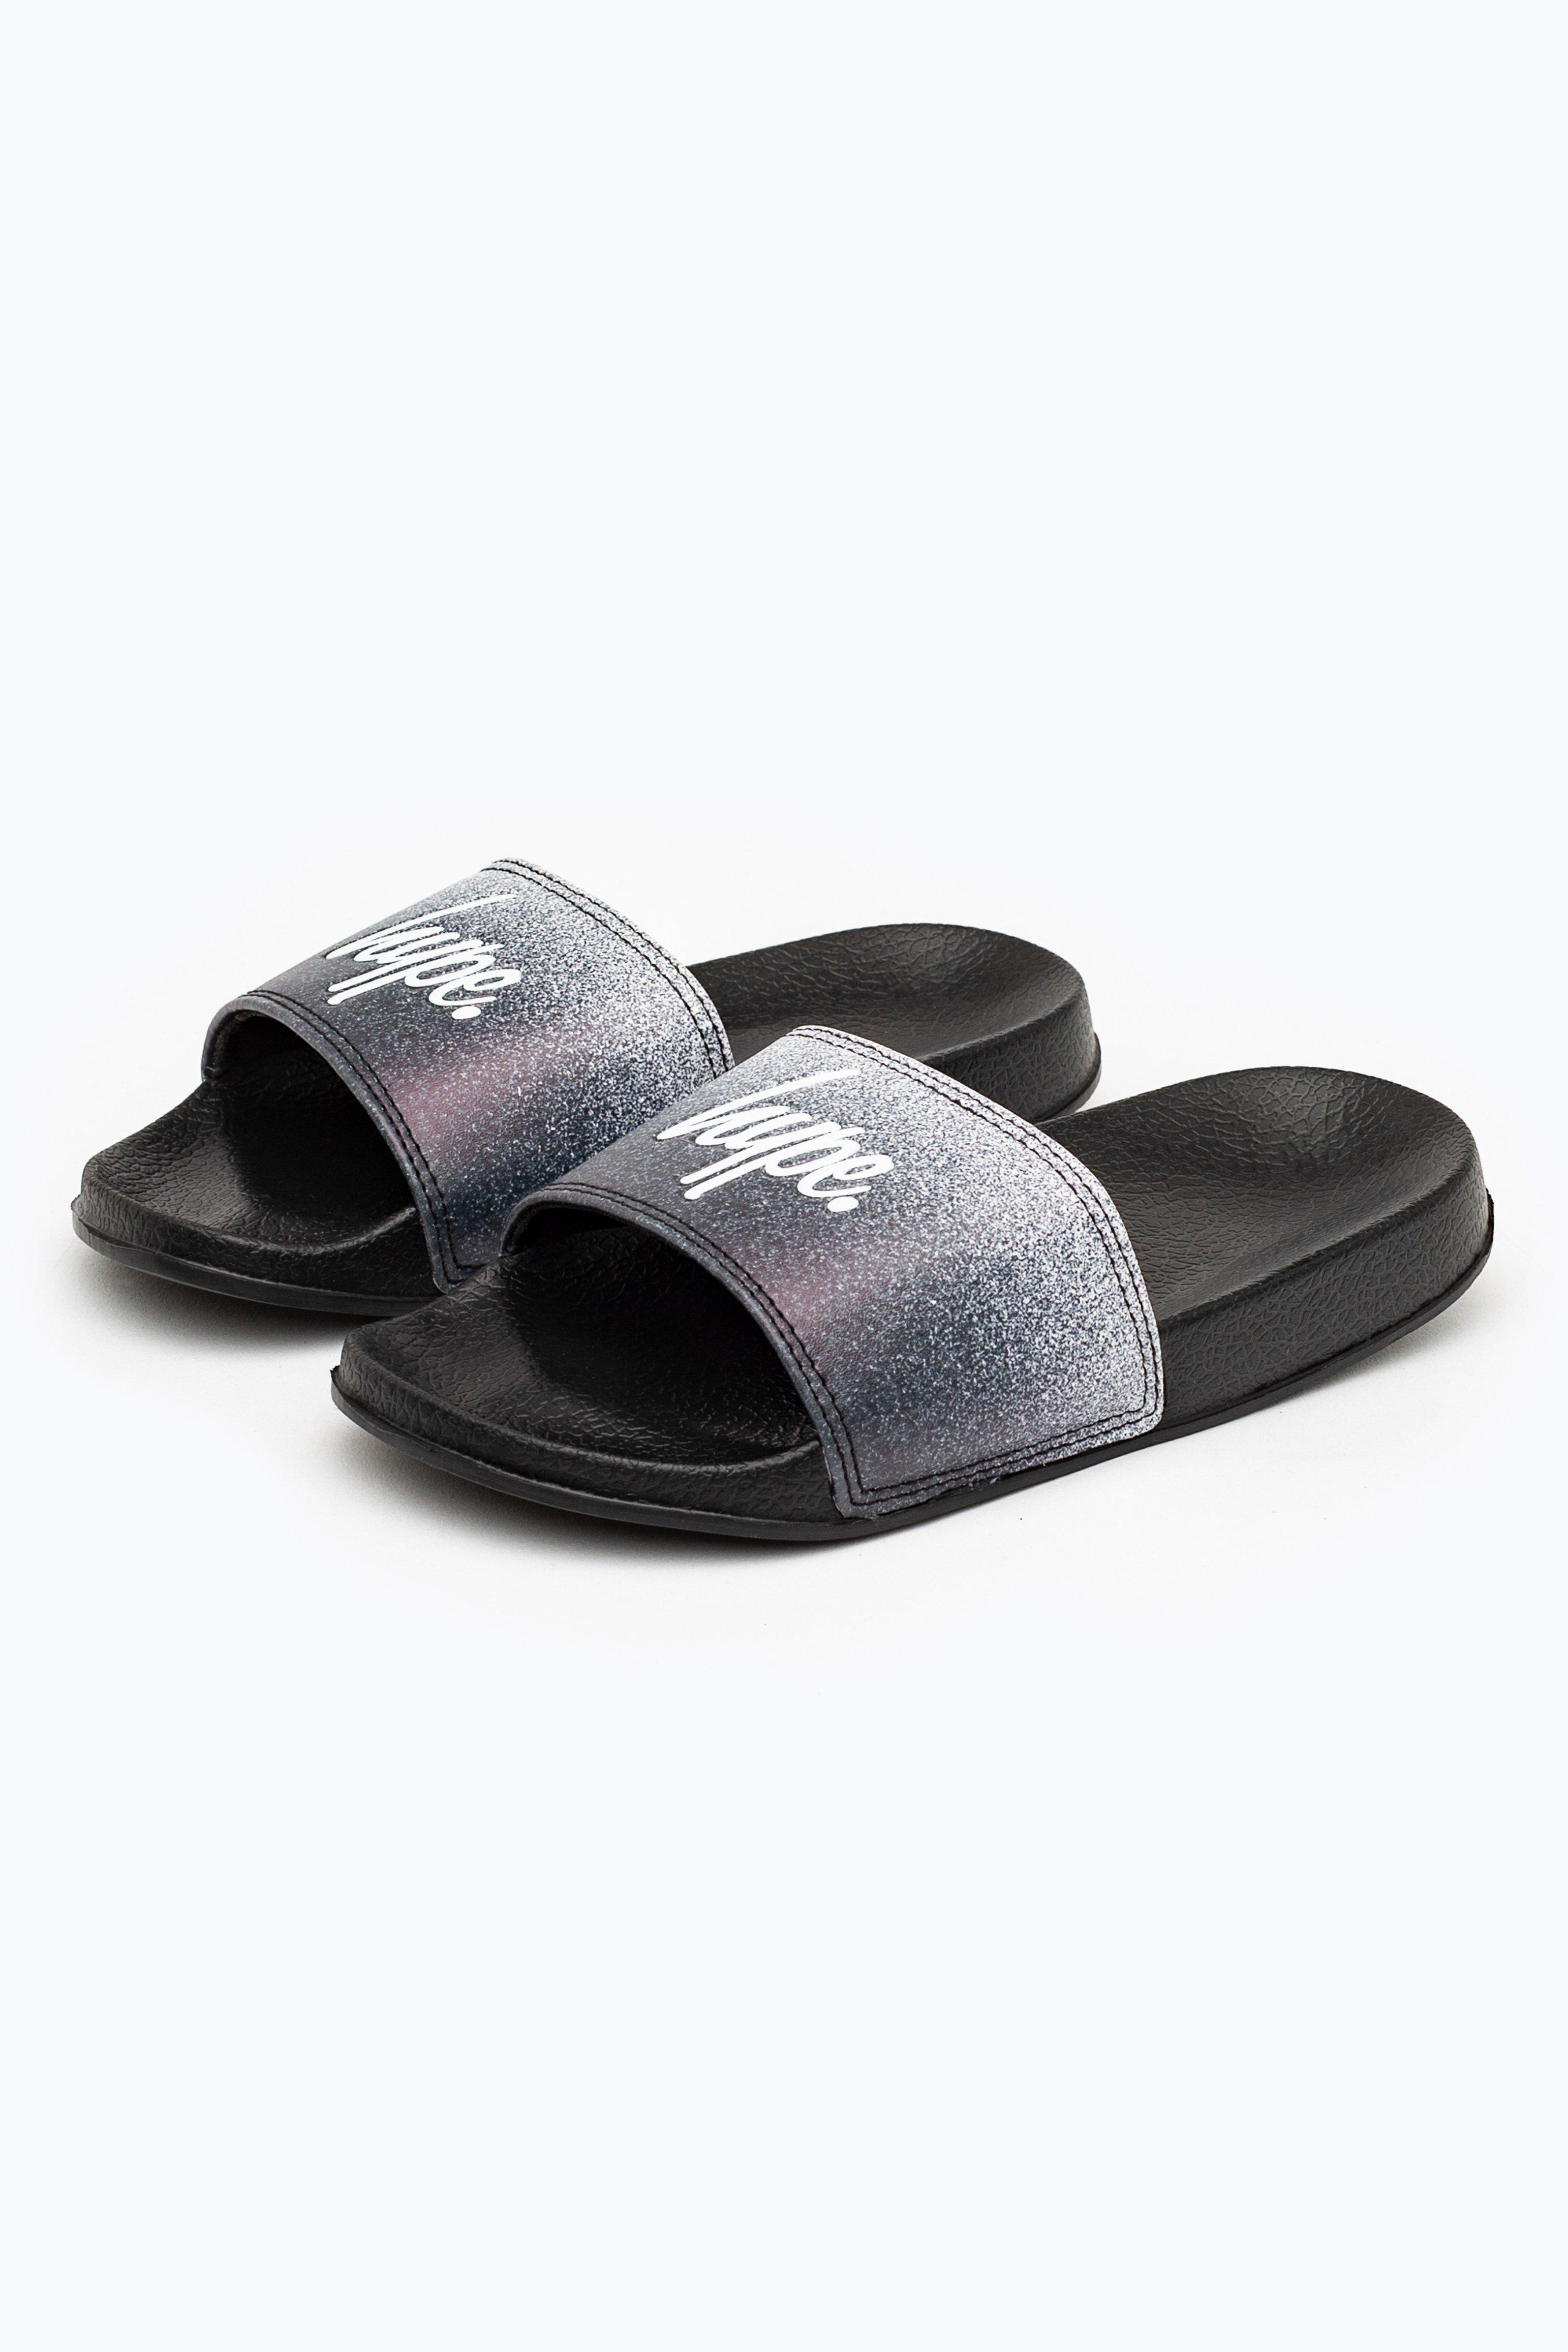 Speckle Fade Sliders